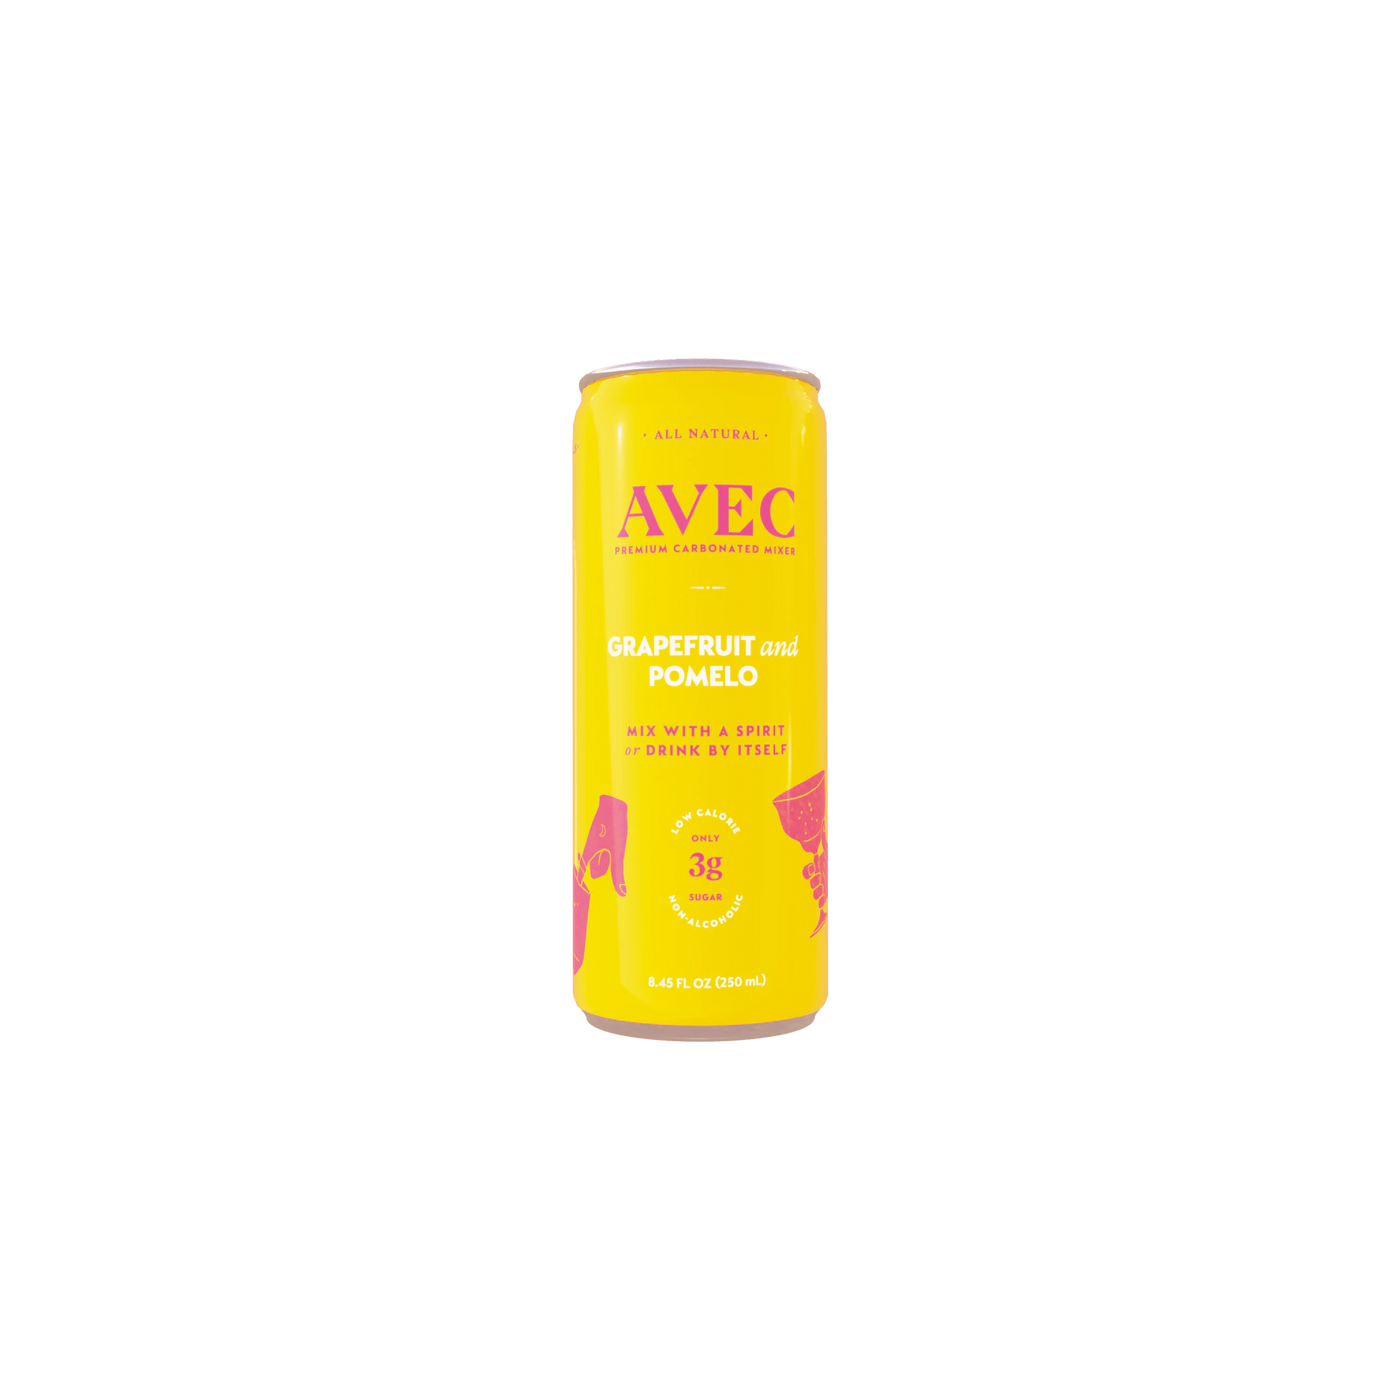 Avec Grapefruit and Pomelo Premium Carbonated Mixer Low in Sugar High in Taste Ruby and Pomelo Flavours